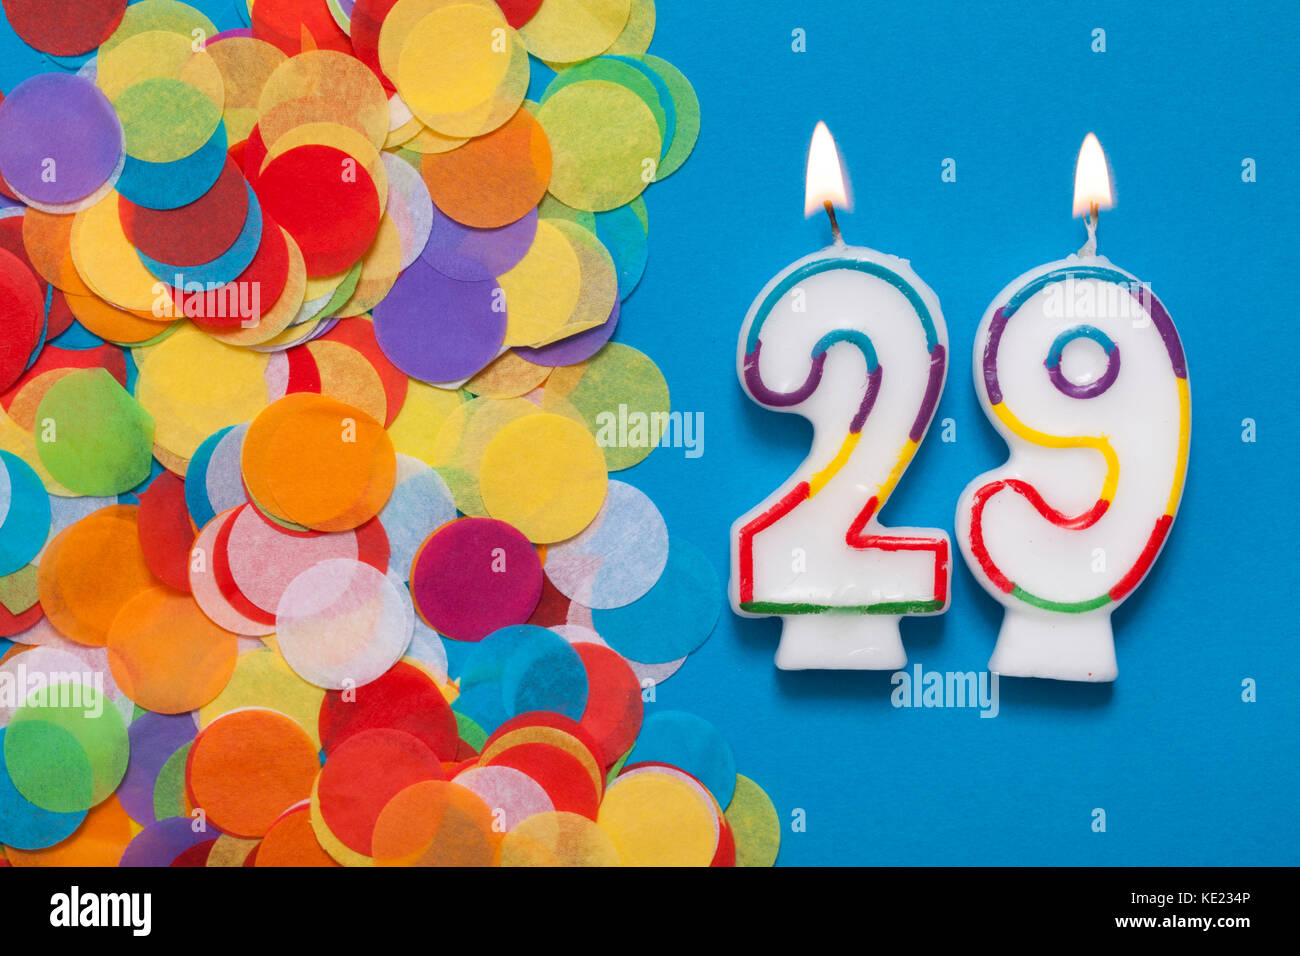 Number 29 celebration candle with party confetti Stock Photo